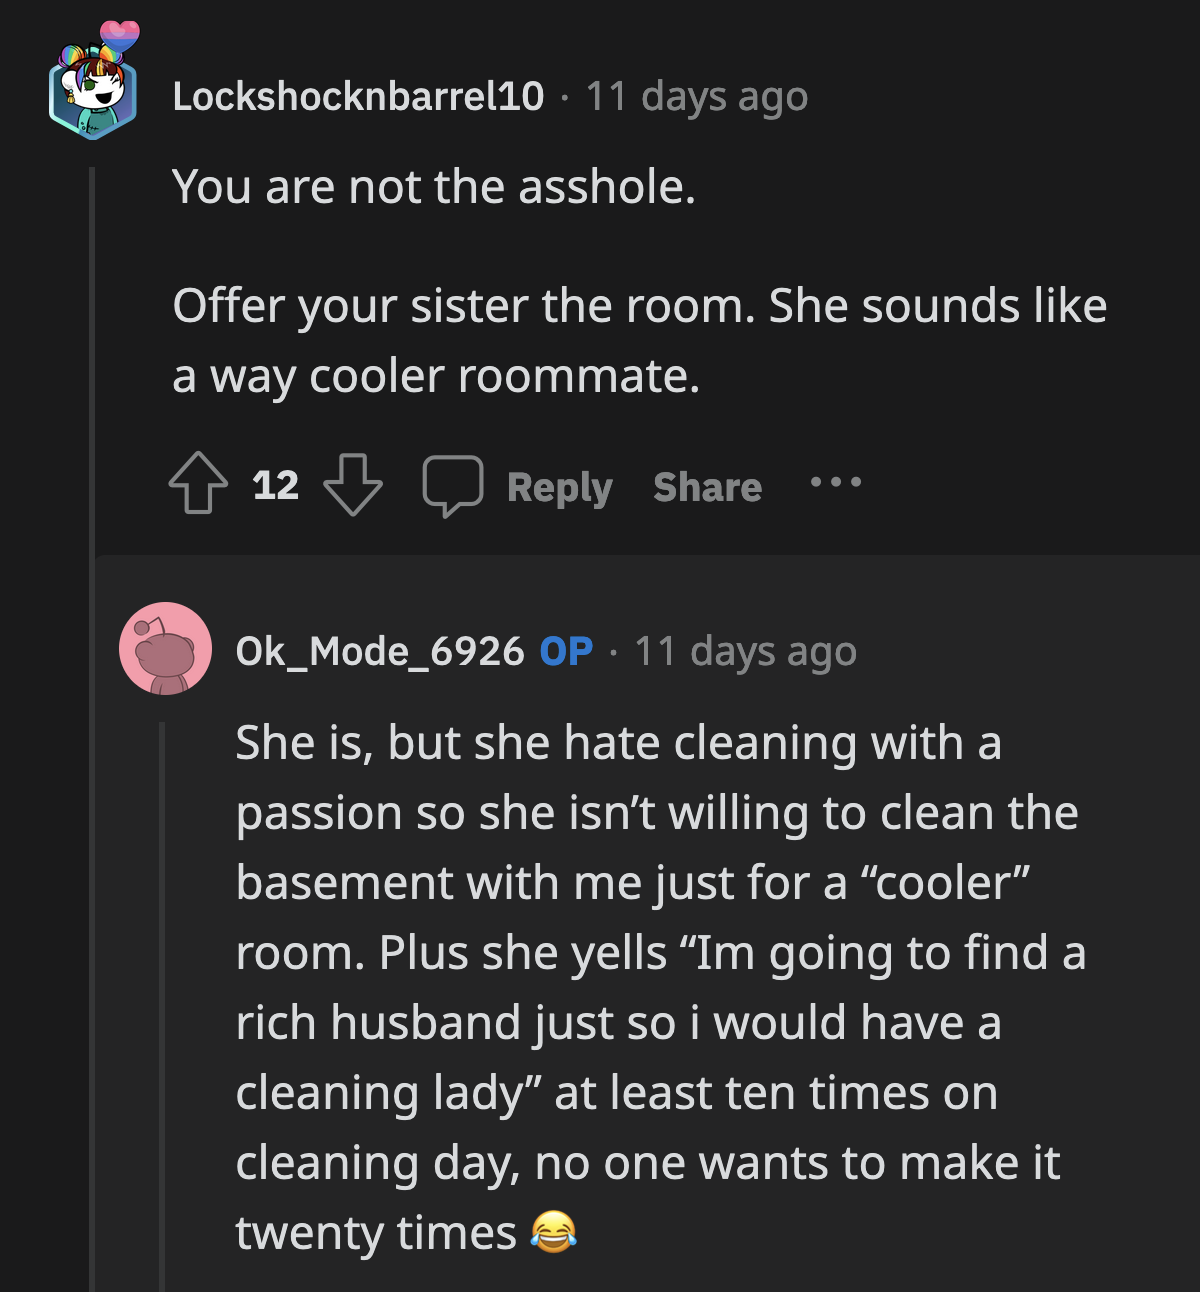 His sister would have been a better roommate, but she is not a fan of cleaning. She jokes about finding a rich husband to hire a cleaner someday — that's how much she enjoys tidying up.